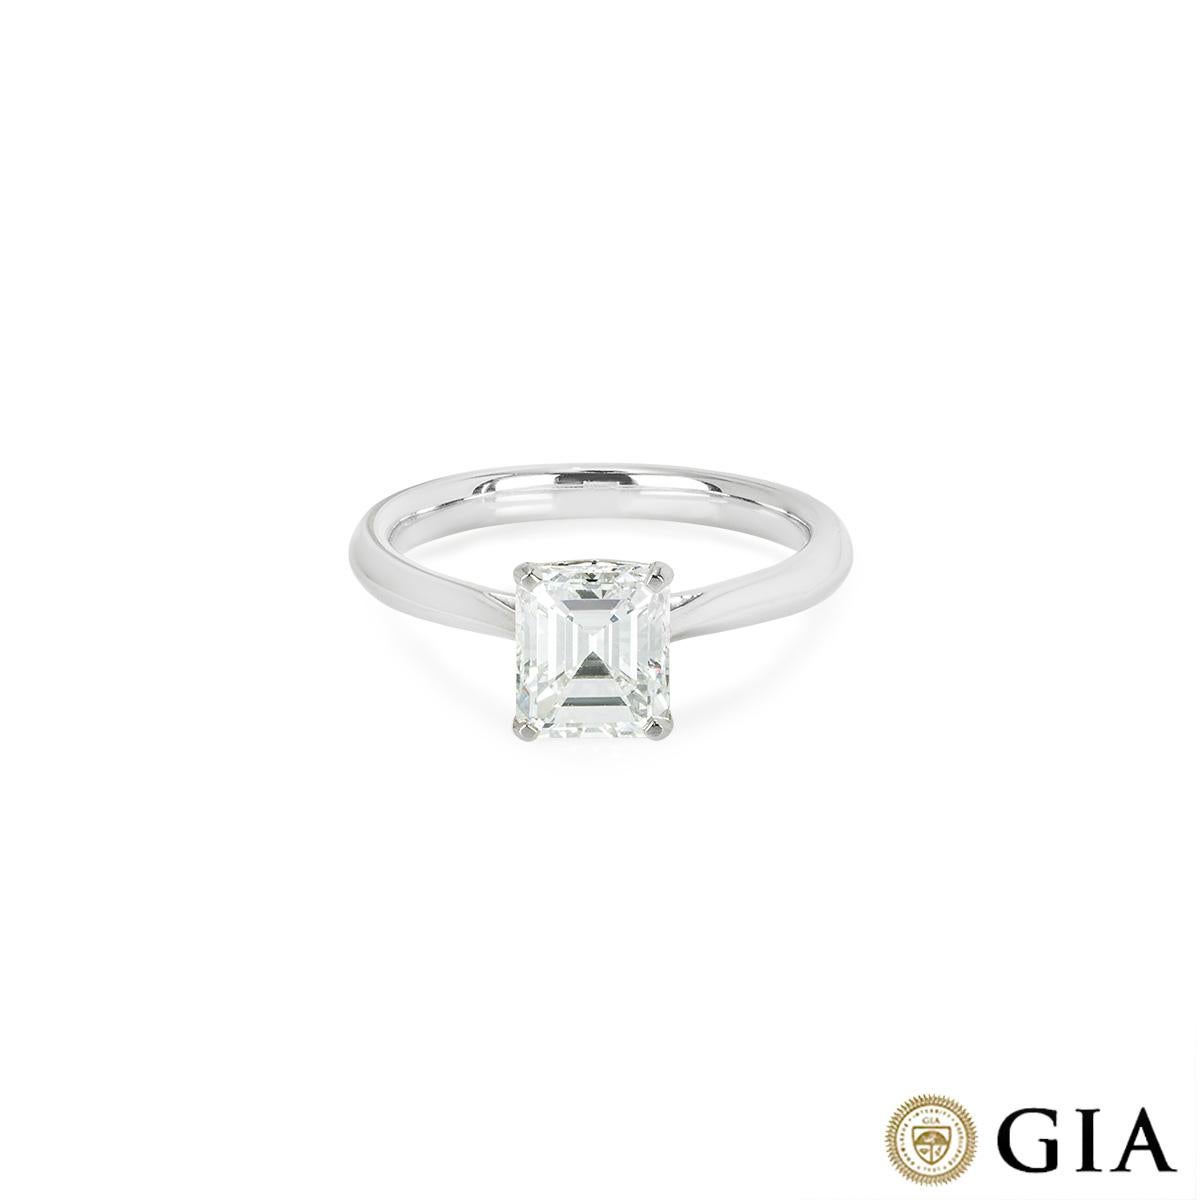 GIA Certified Platinum Emerald Cut Diamond Engagement Ring 1.51ct E/VS2 In New Condition For Sale In London, GB